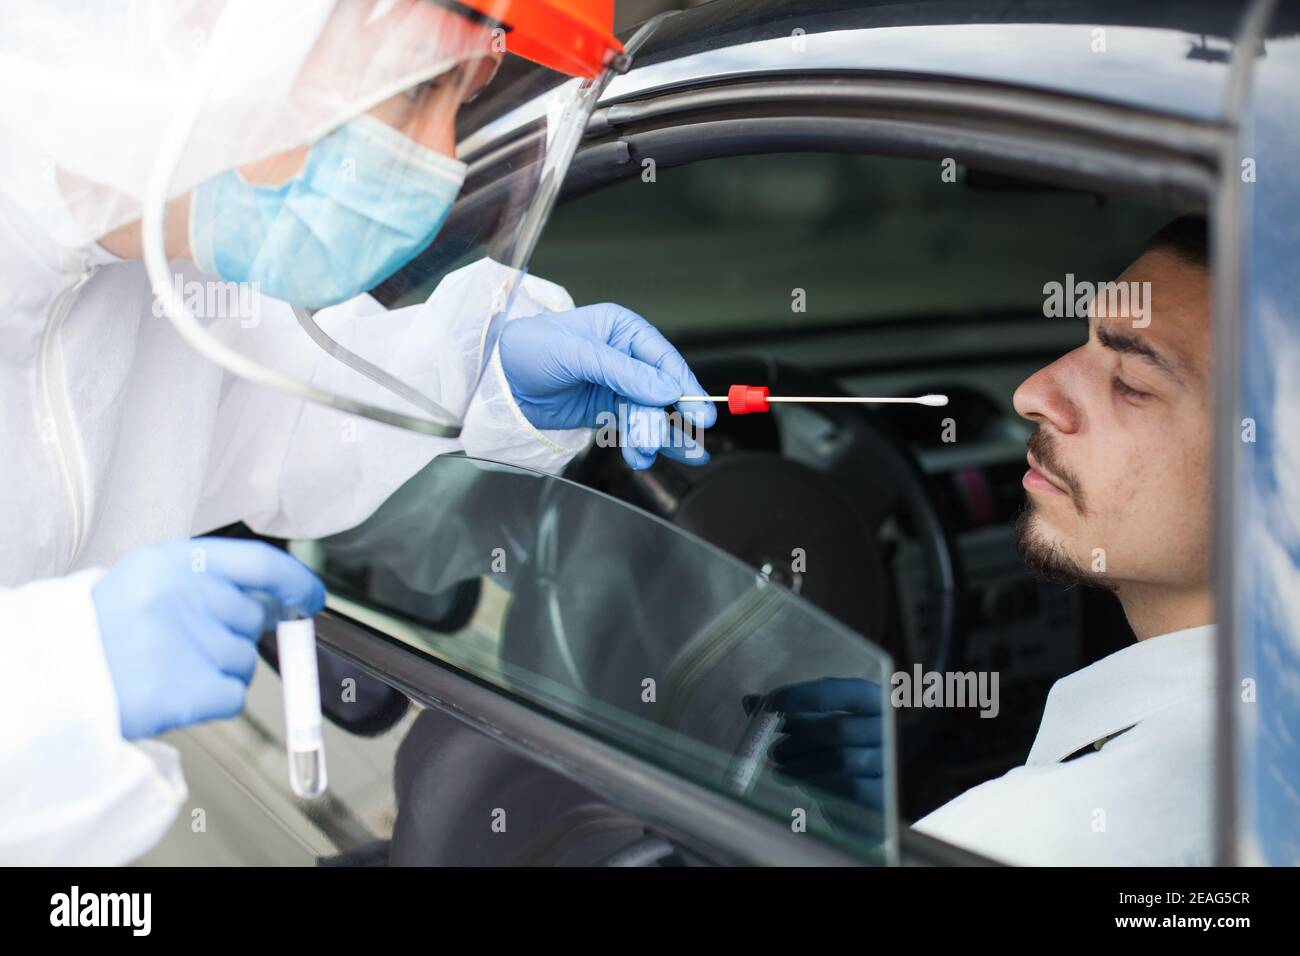 Drive-thru Coronavirus COVID-19 test,paramedic in personal protective equipment & face shield performing nasal swab through car window on male patient Stock Photo